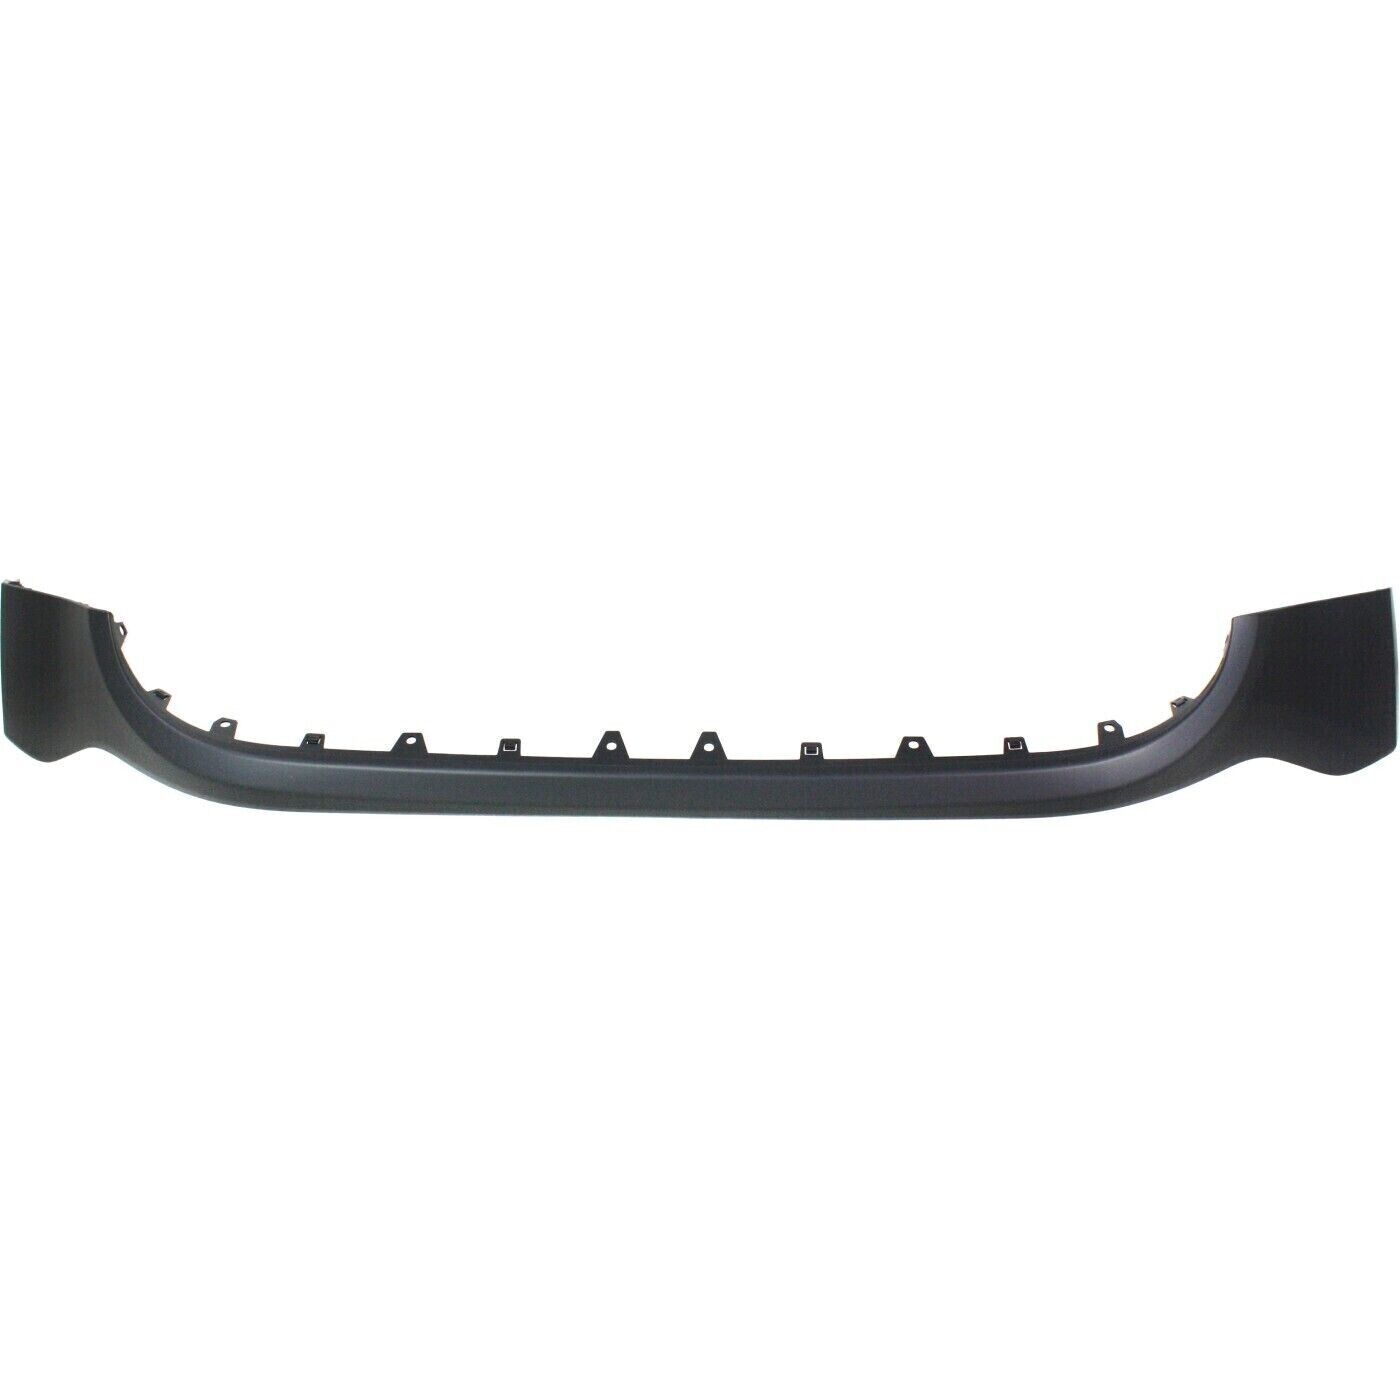 NEW Paintable Front Upper Bumper Cover For 2015-2018 Jeep Renegade SHIPS TODAY